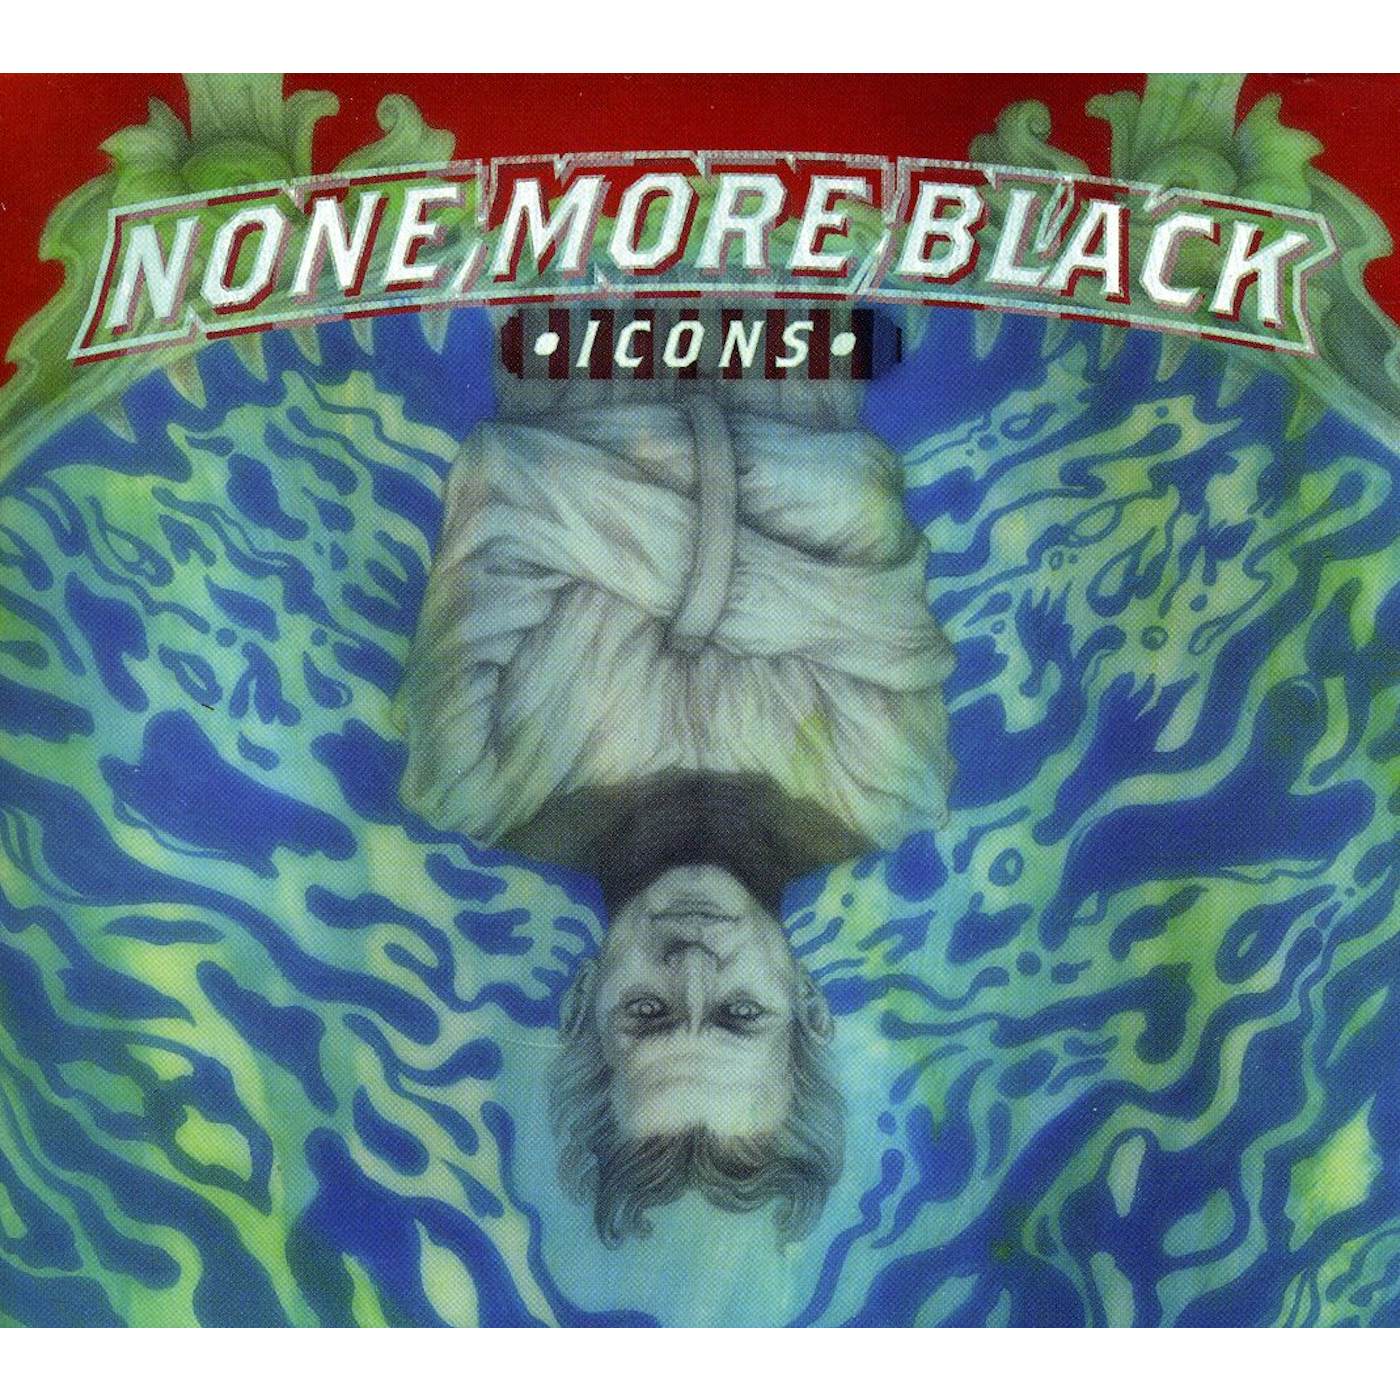 None More Black ICONS CD